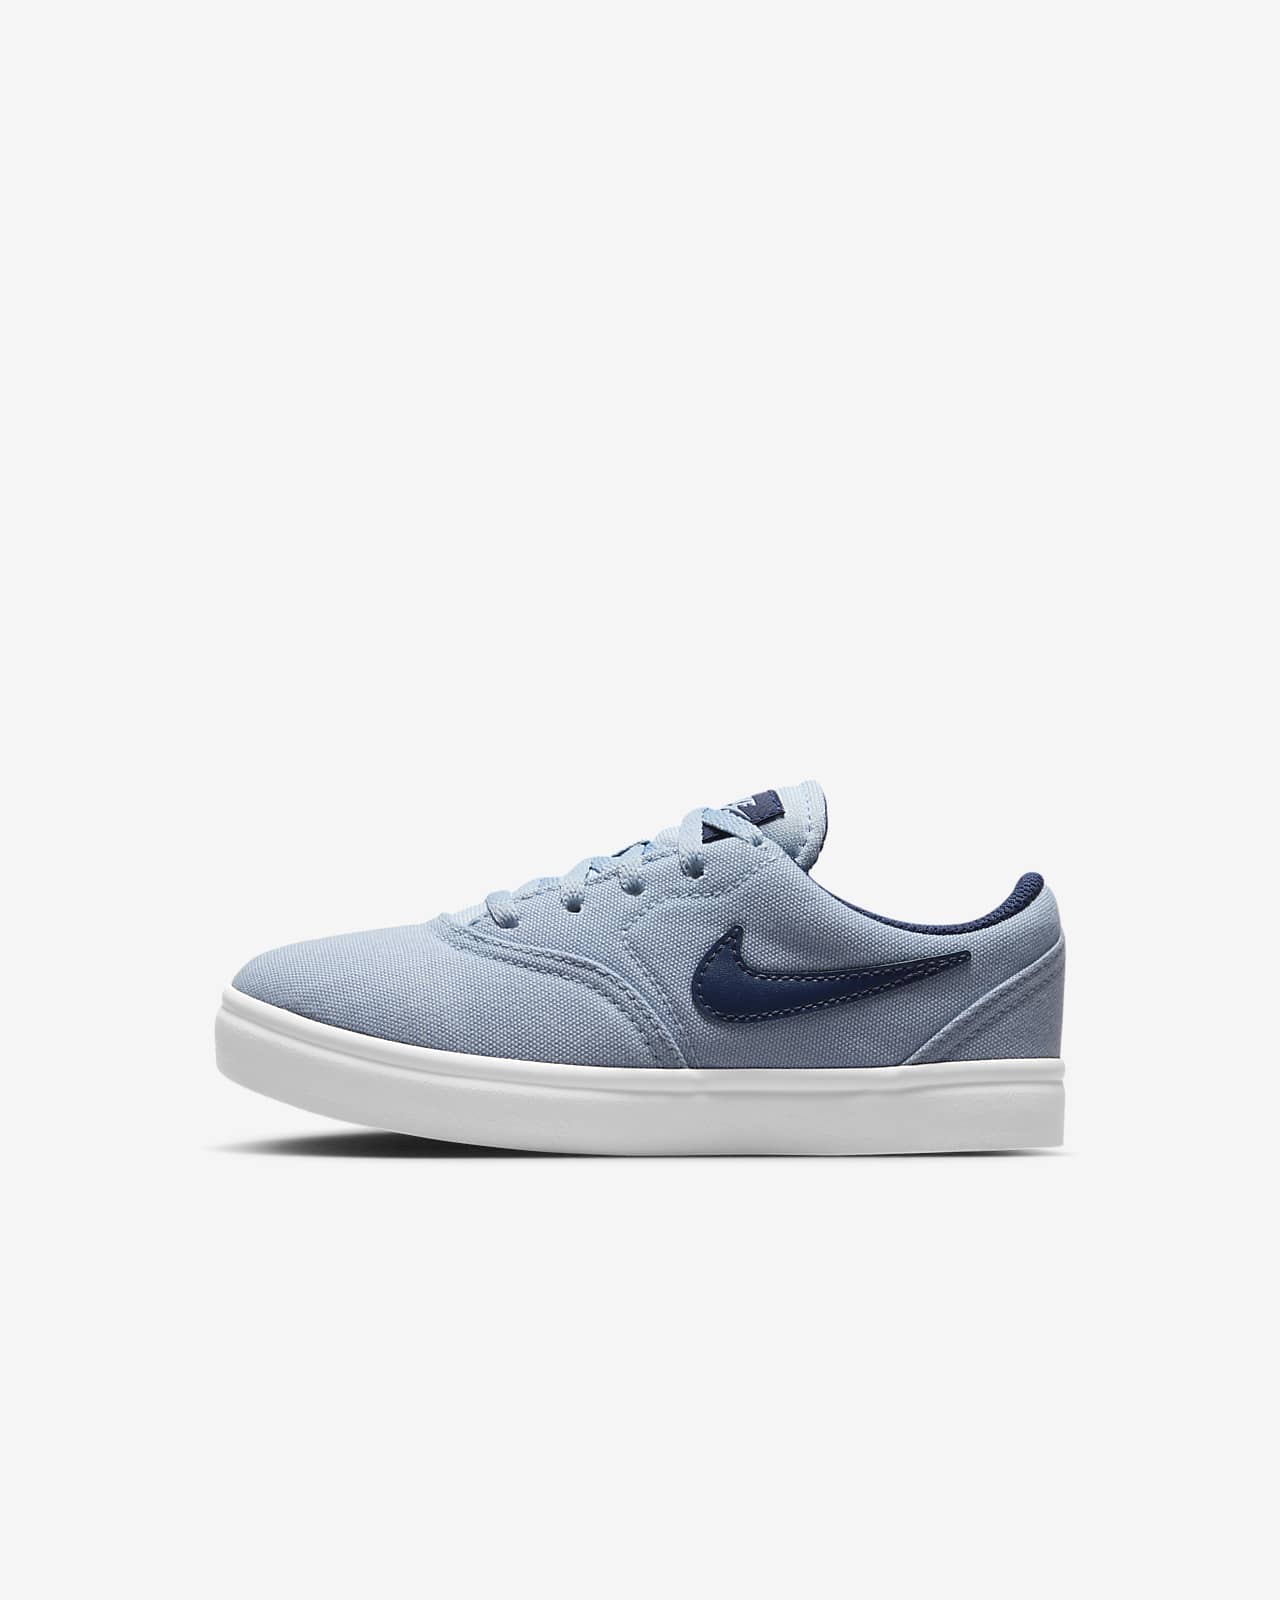 Nike SB Check Canvas Younger Kids' Skate Shoes